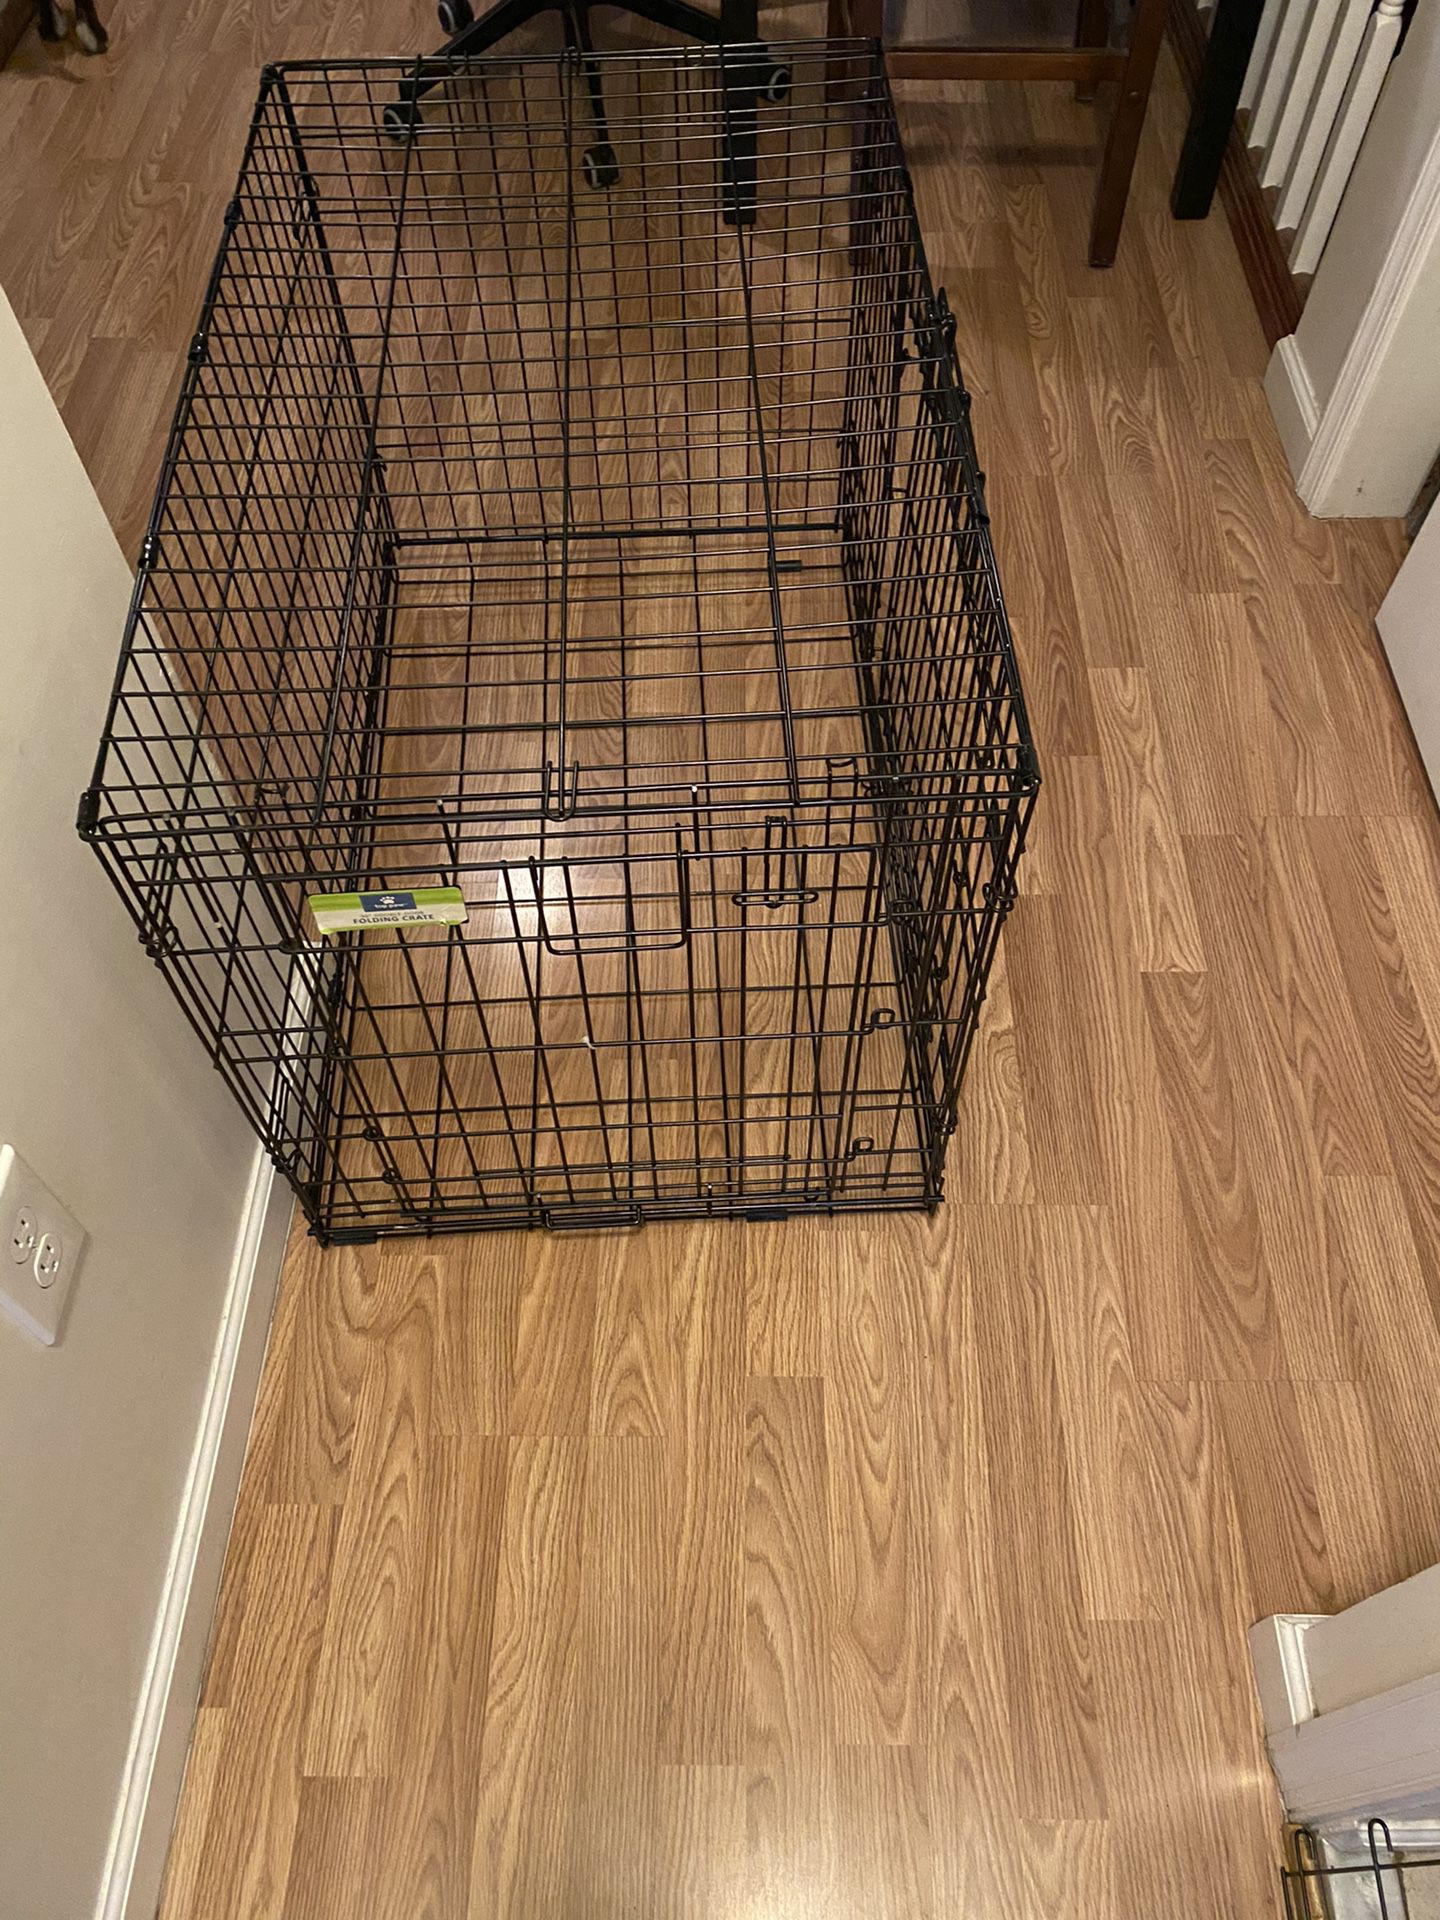 Top Paw 36 inch Dog Crate